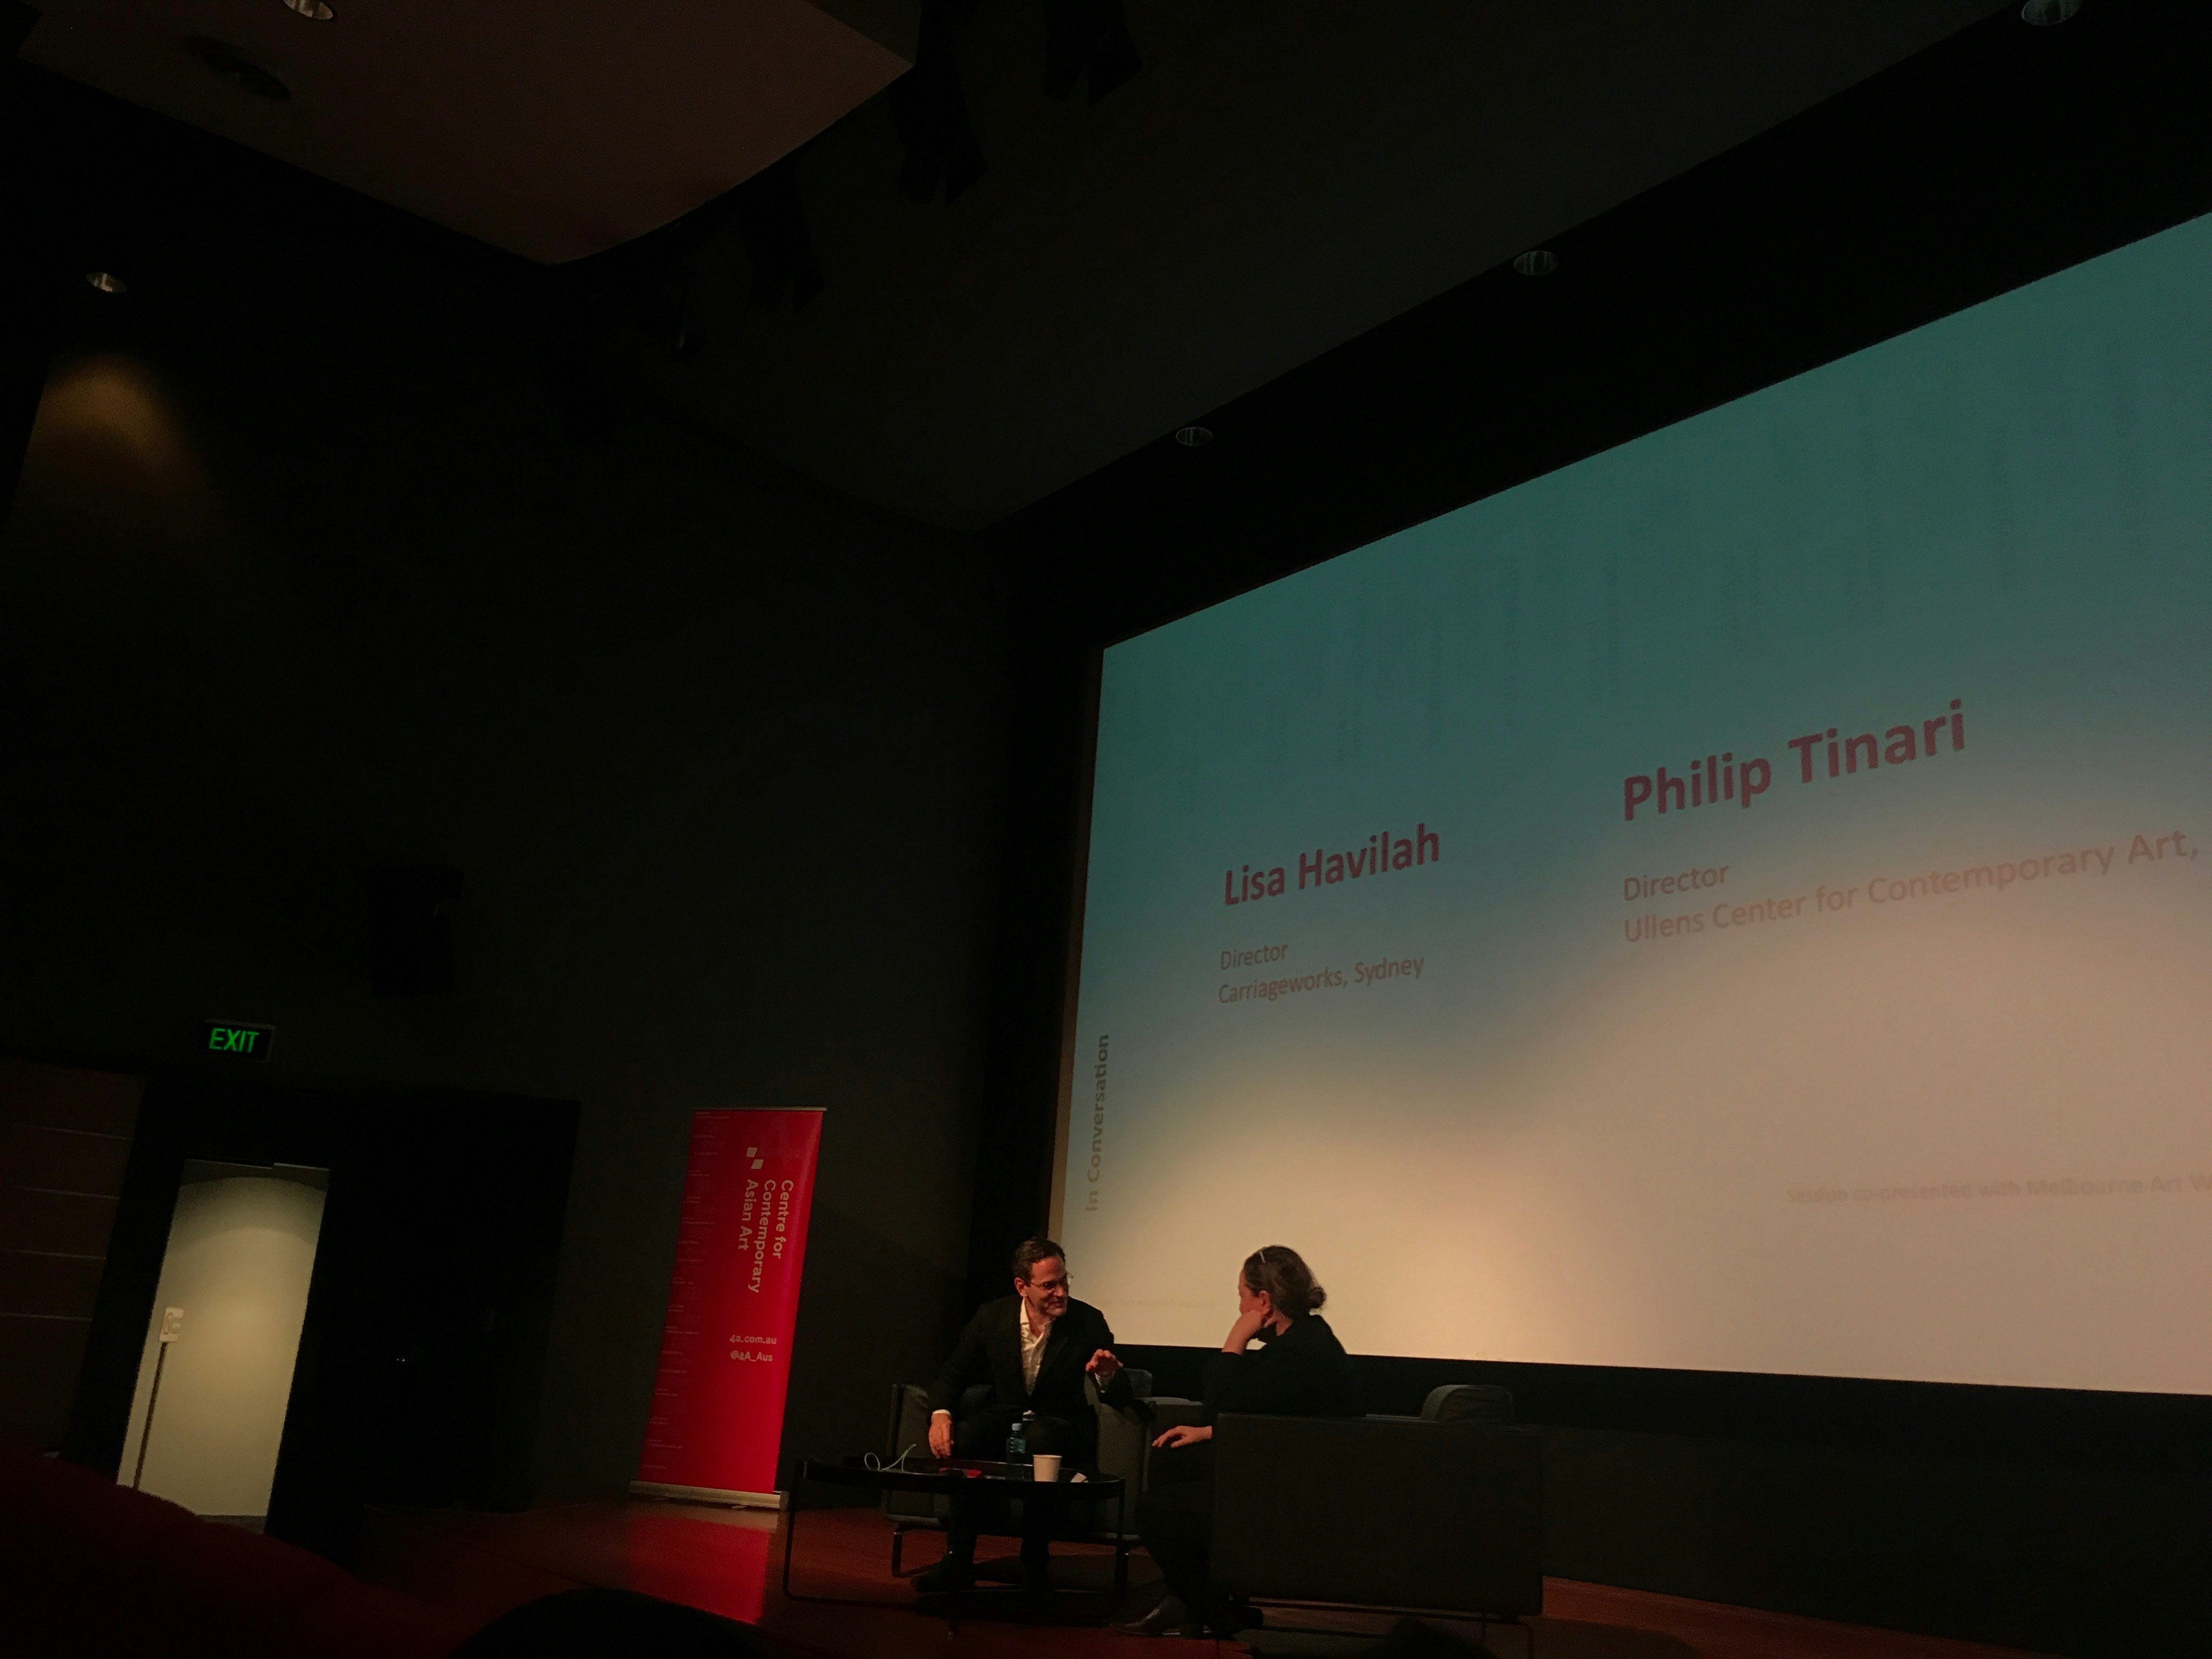 Two figures sitting on stage face each other in conversation, while the large projector screen behind them reads: Lisa Havilah, Philip Tinari.